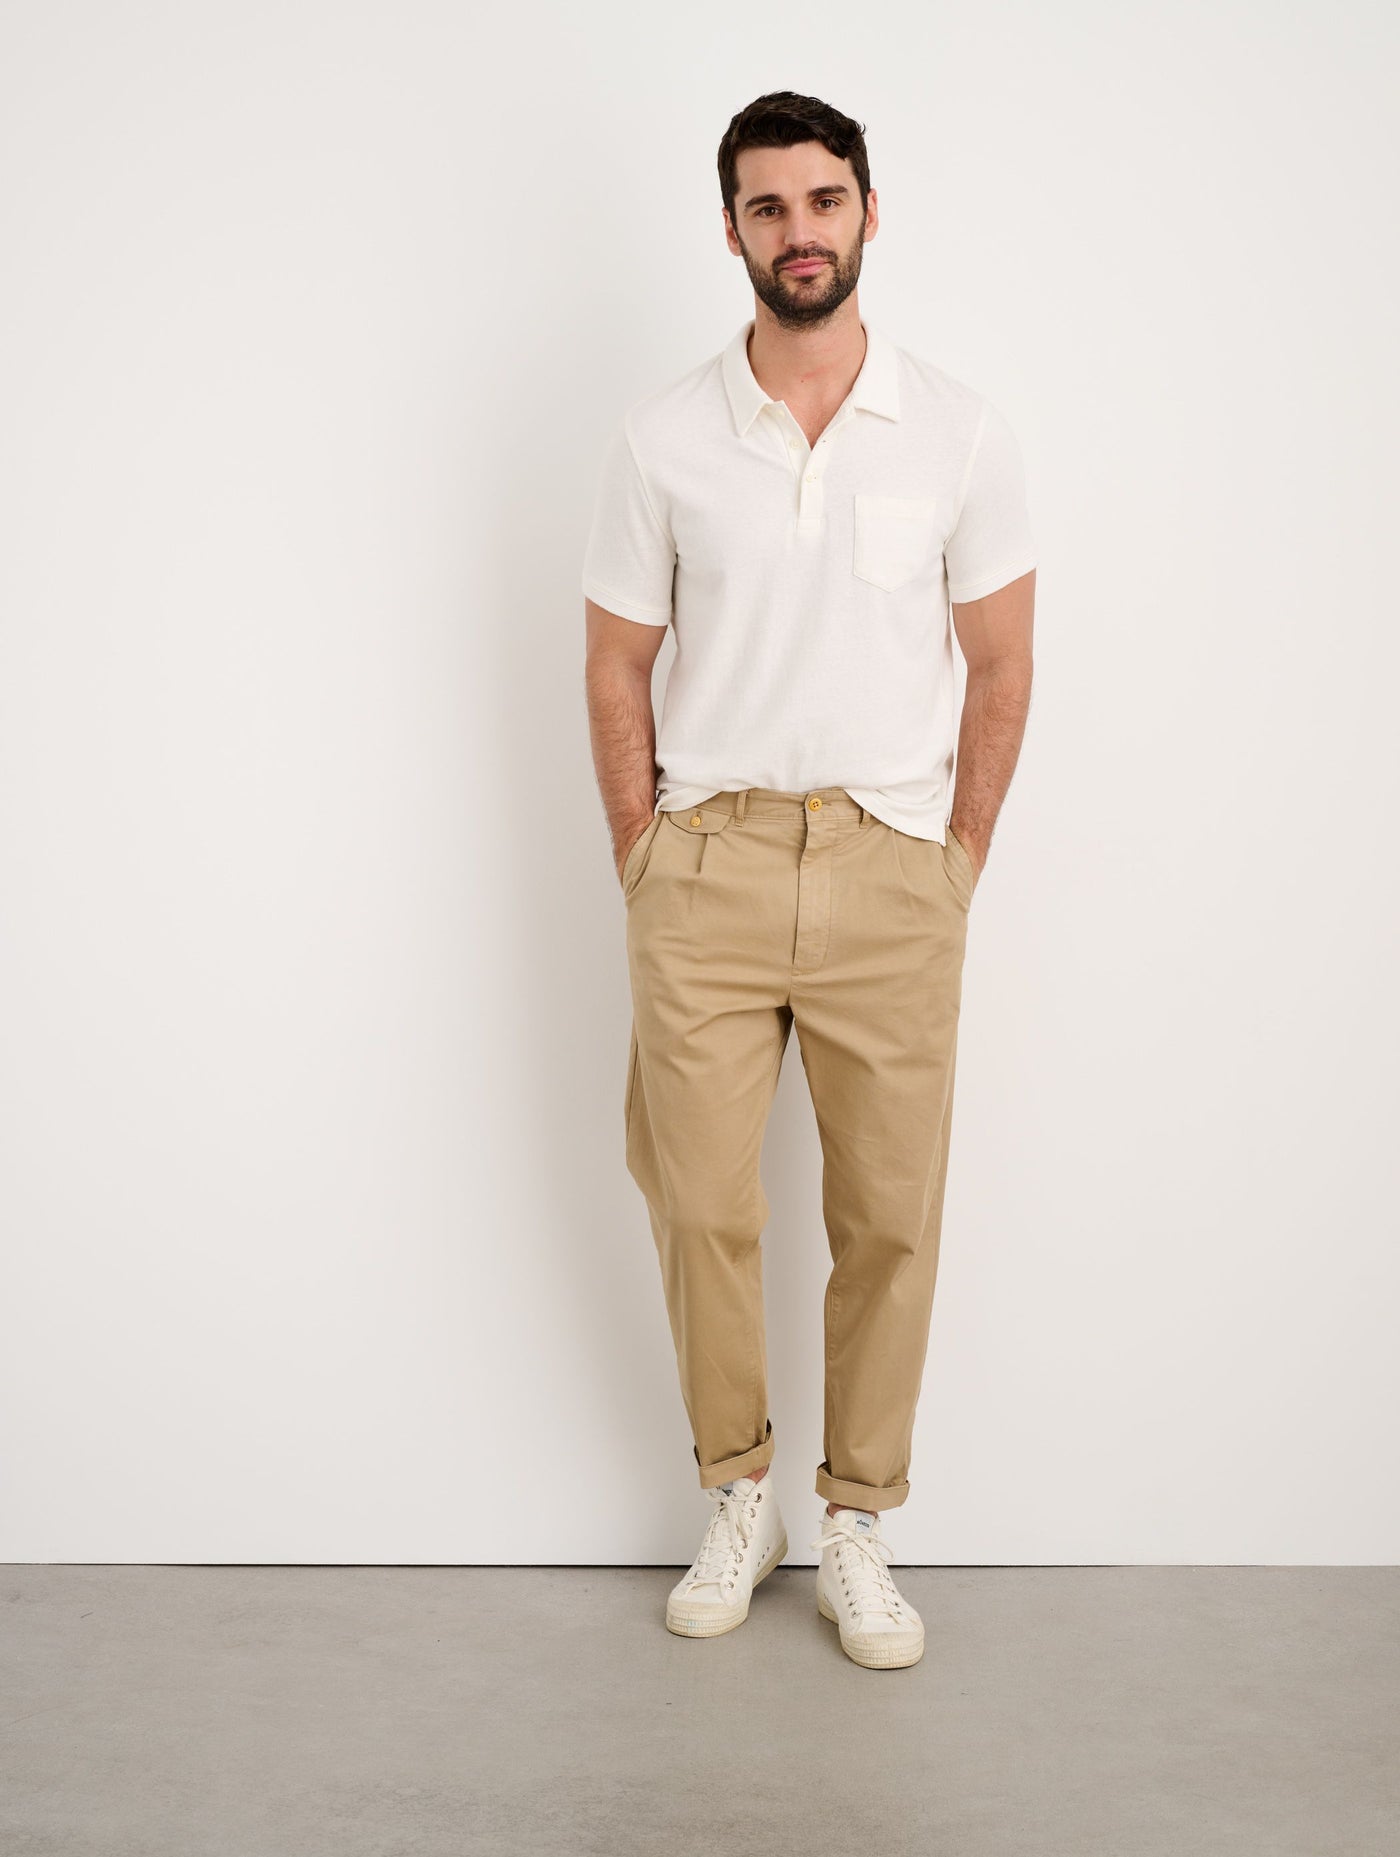 Standard Pleated Pant in Chino